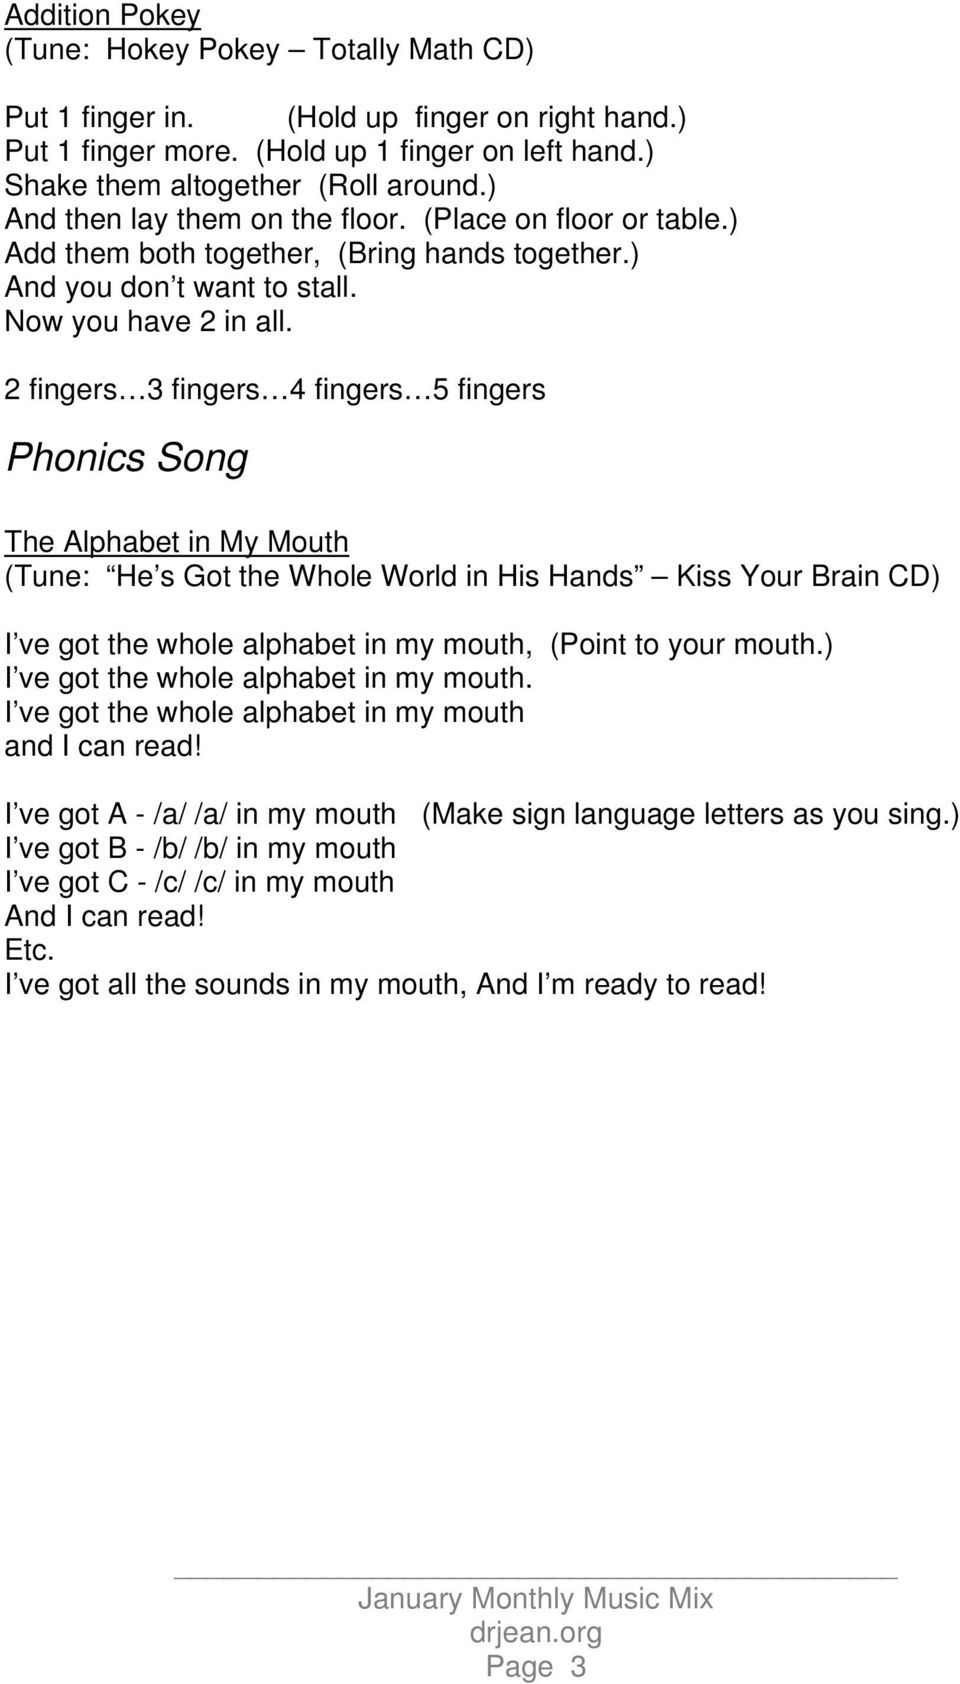 2 fingers 3 fingers 4 fingers 5 fingers Phonics Song The Alphabet in My Mouth (Tune: He s Got the Whole World in His Hands Kiss Your Brain CD) I ve got the whole alphabet in my mouth, (Point to your